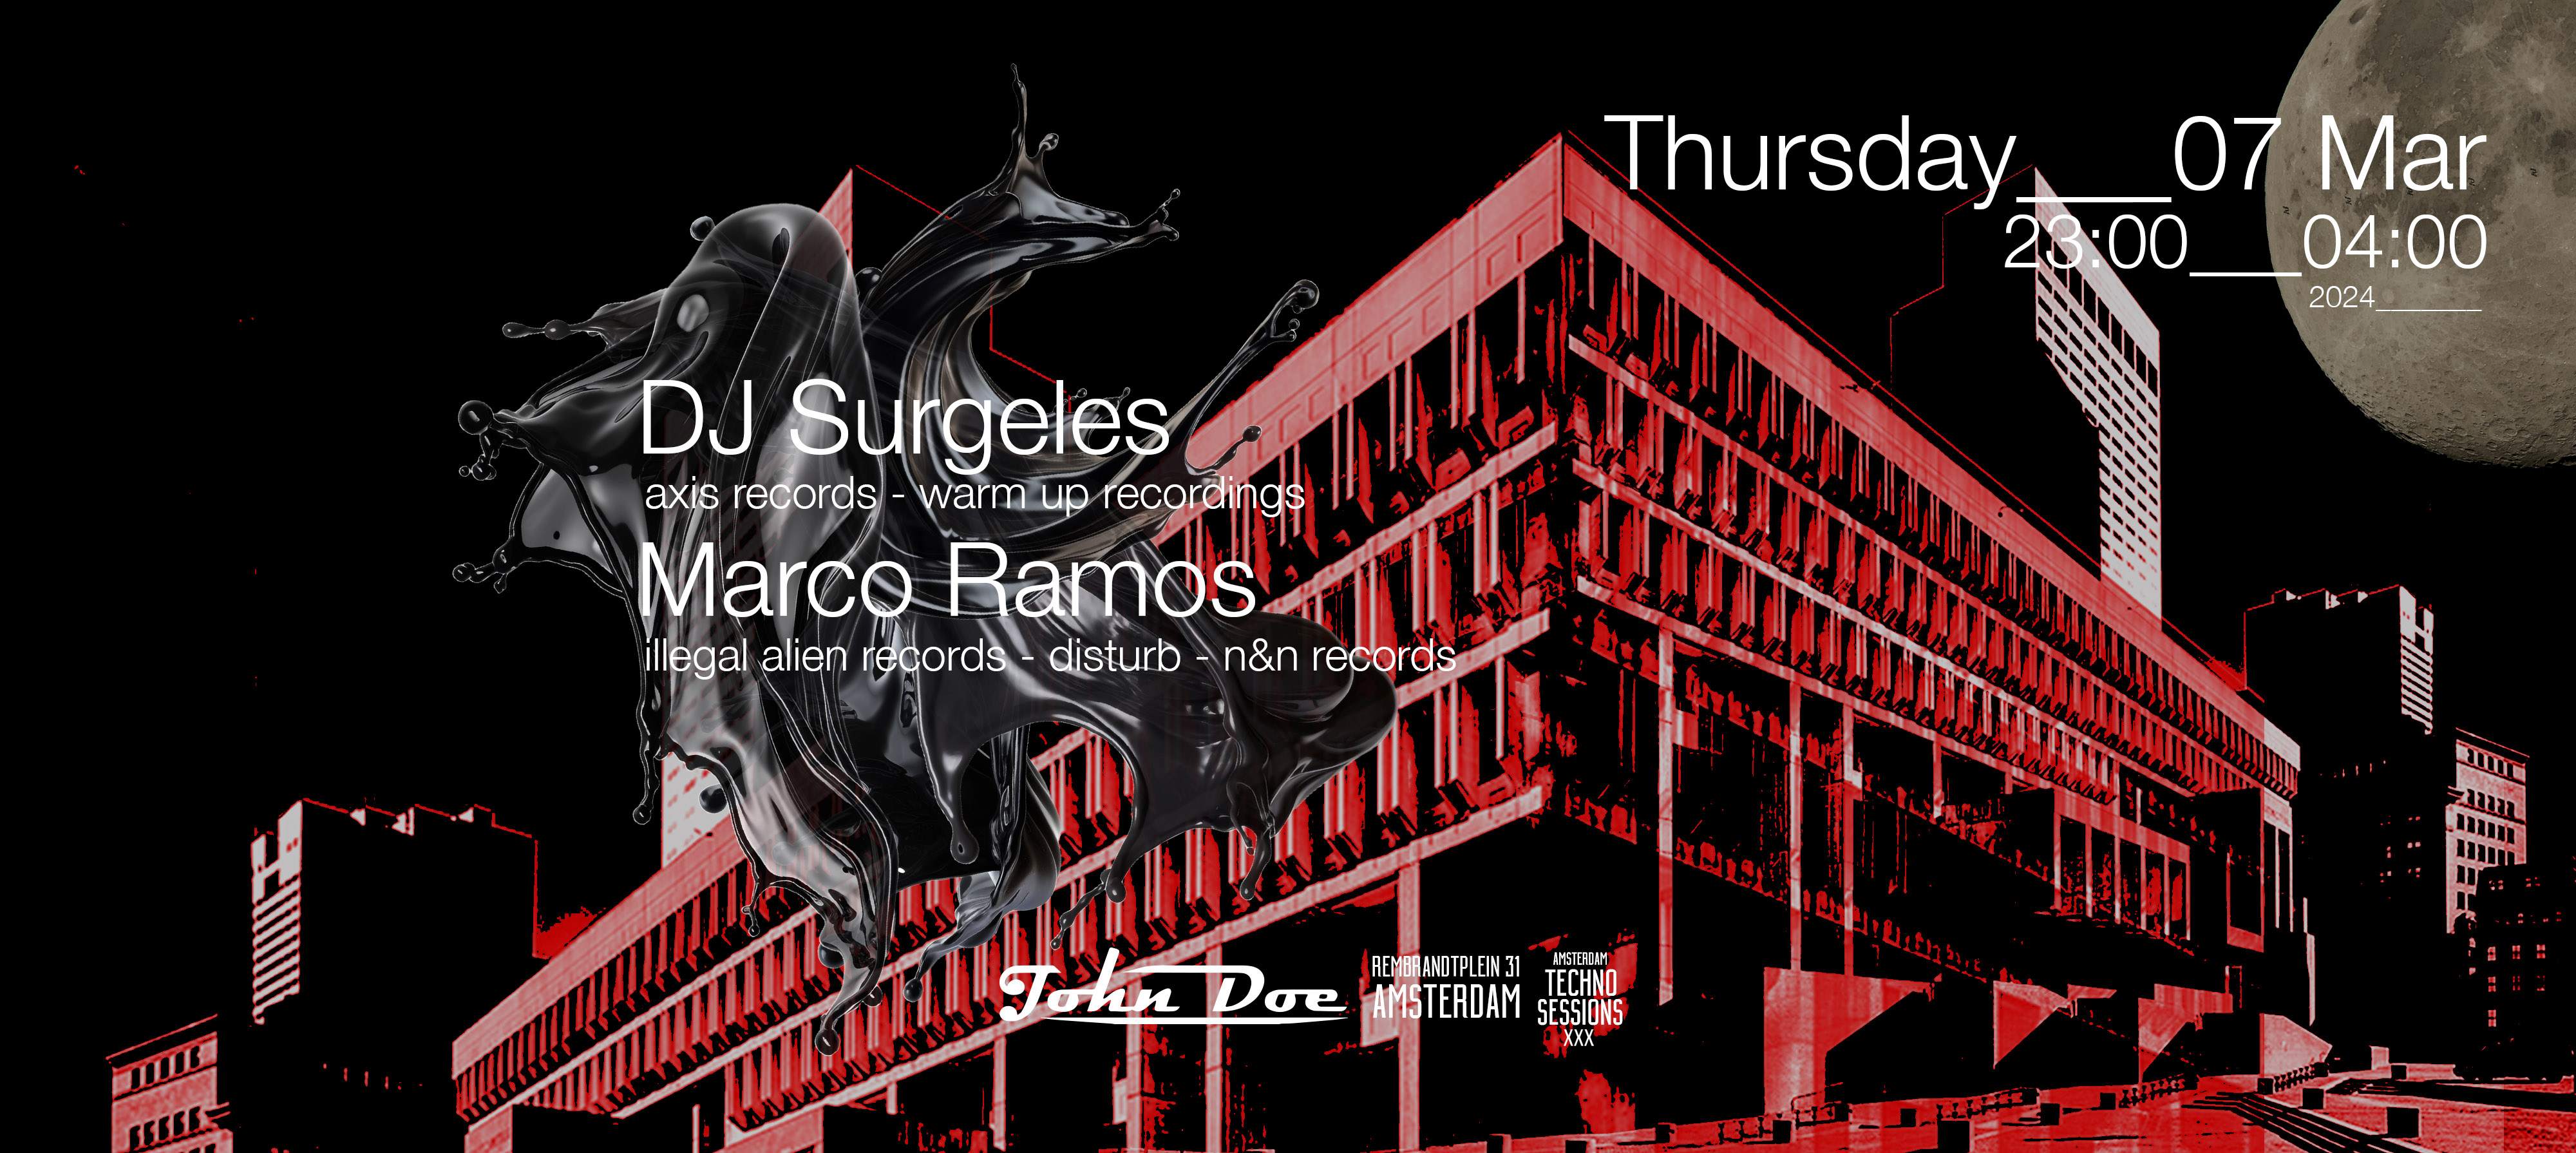 Amsterdam Techno Sessions with DJ Surgeles (Axis Records - Warm Up Recordings) - Página trasera